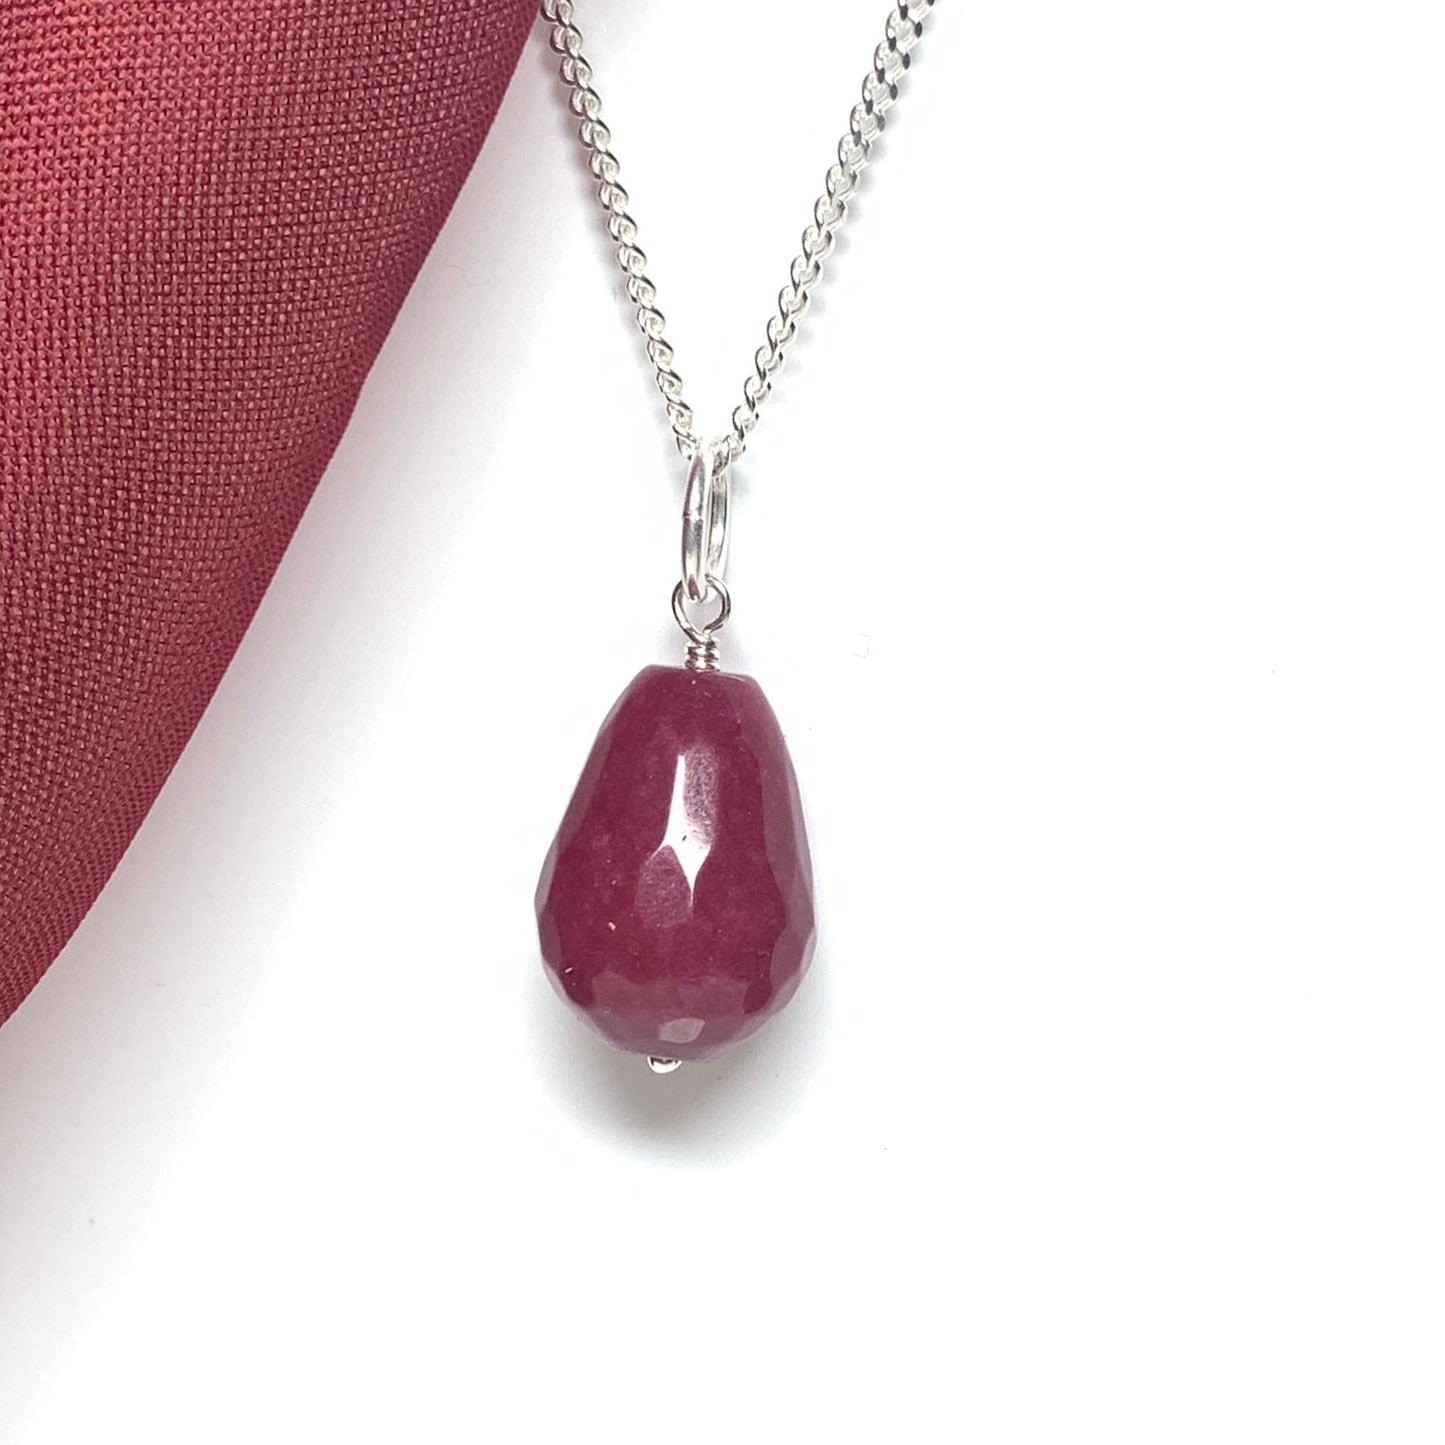 Tear Drop Silver Pear Shaped red Jade Necklace Pendant